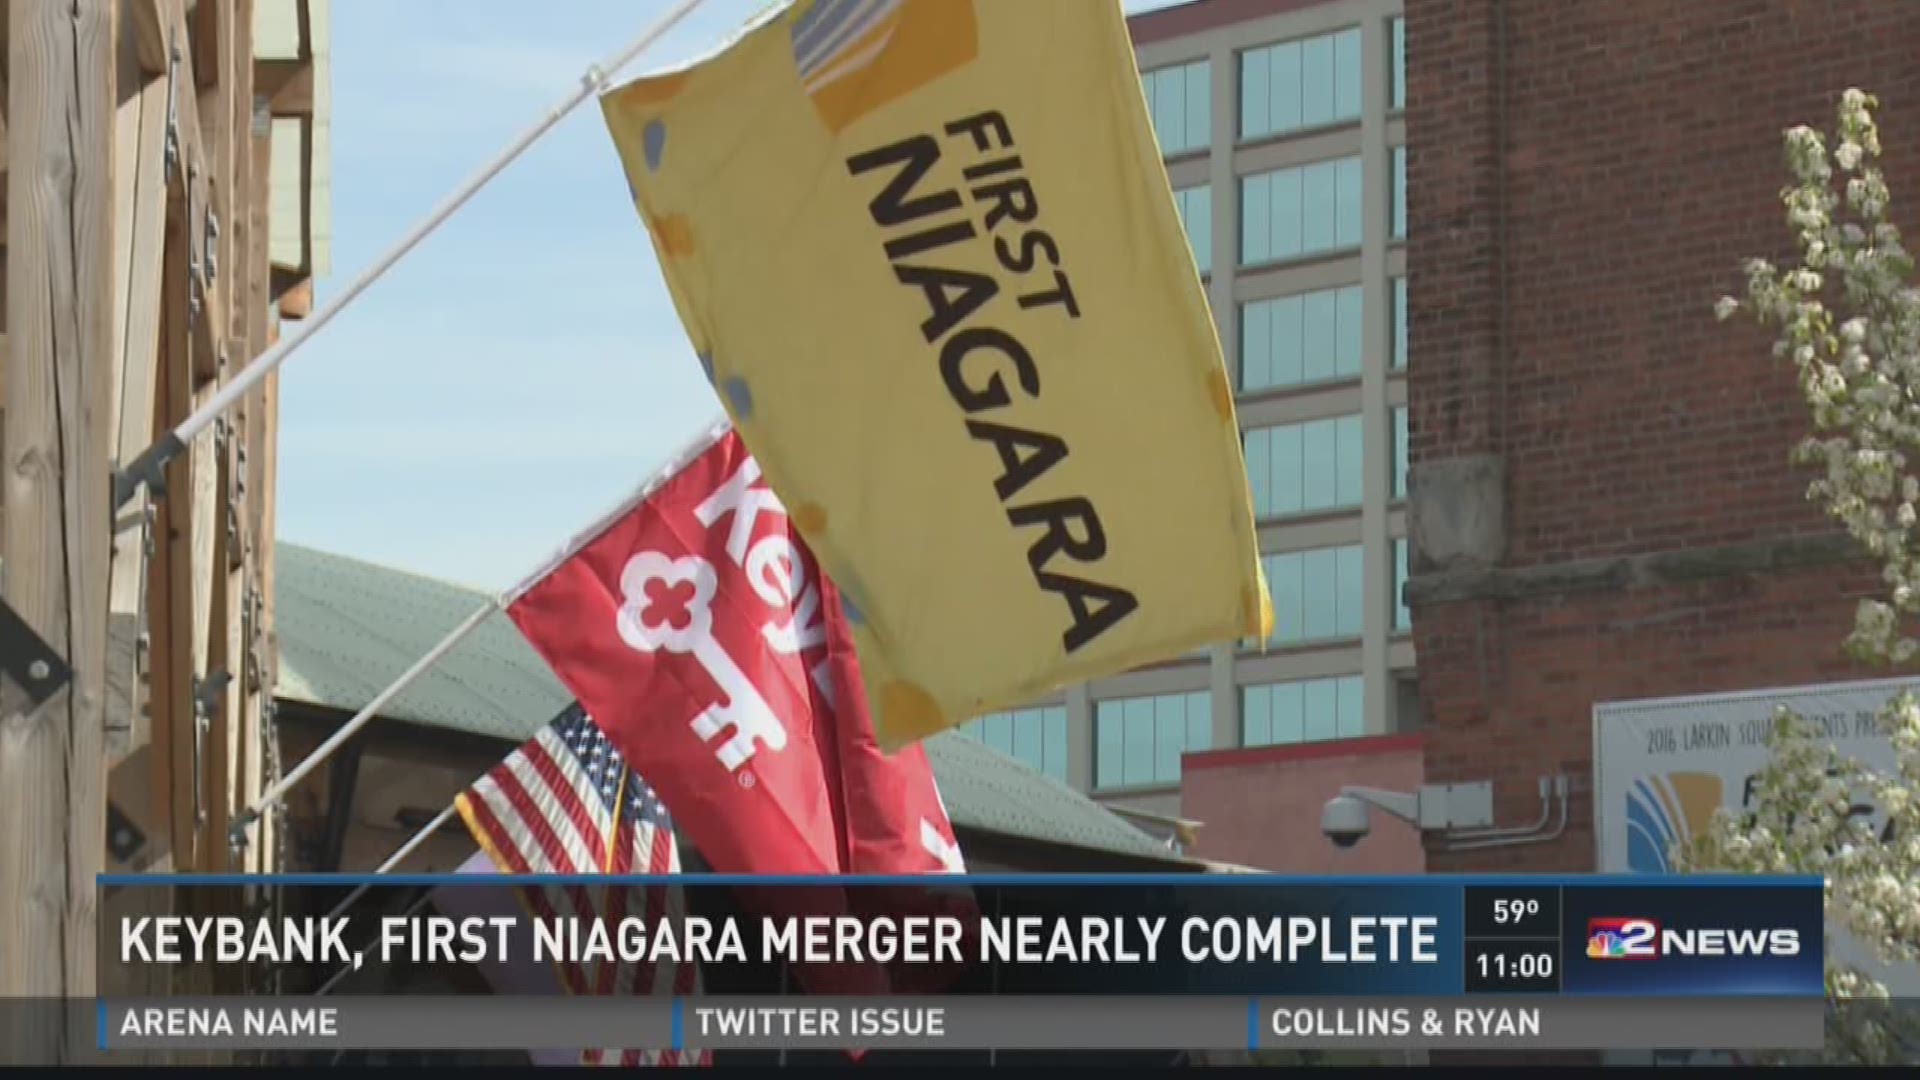 KeyBank, First Niagara Merger Nearly Complete